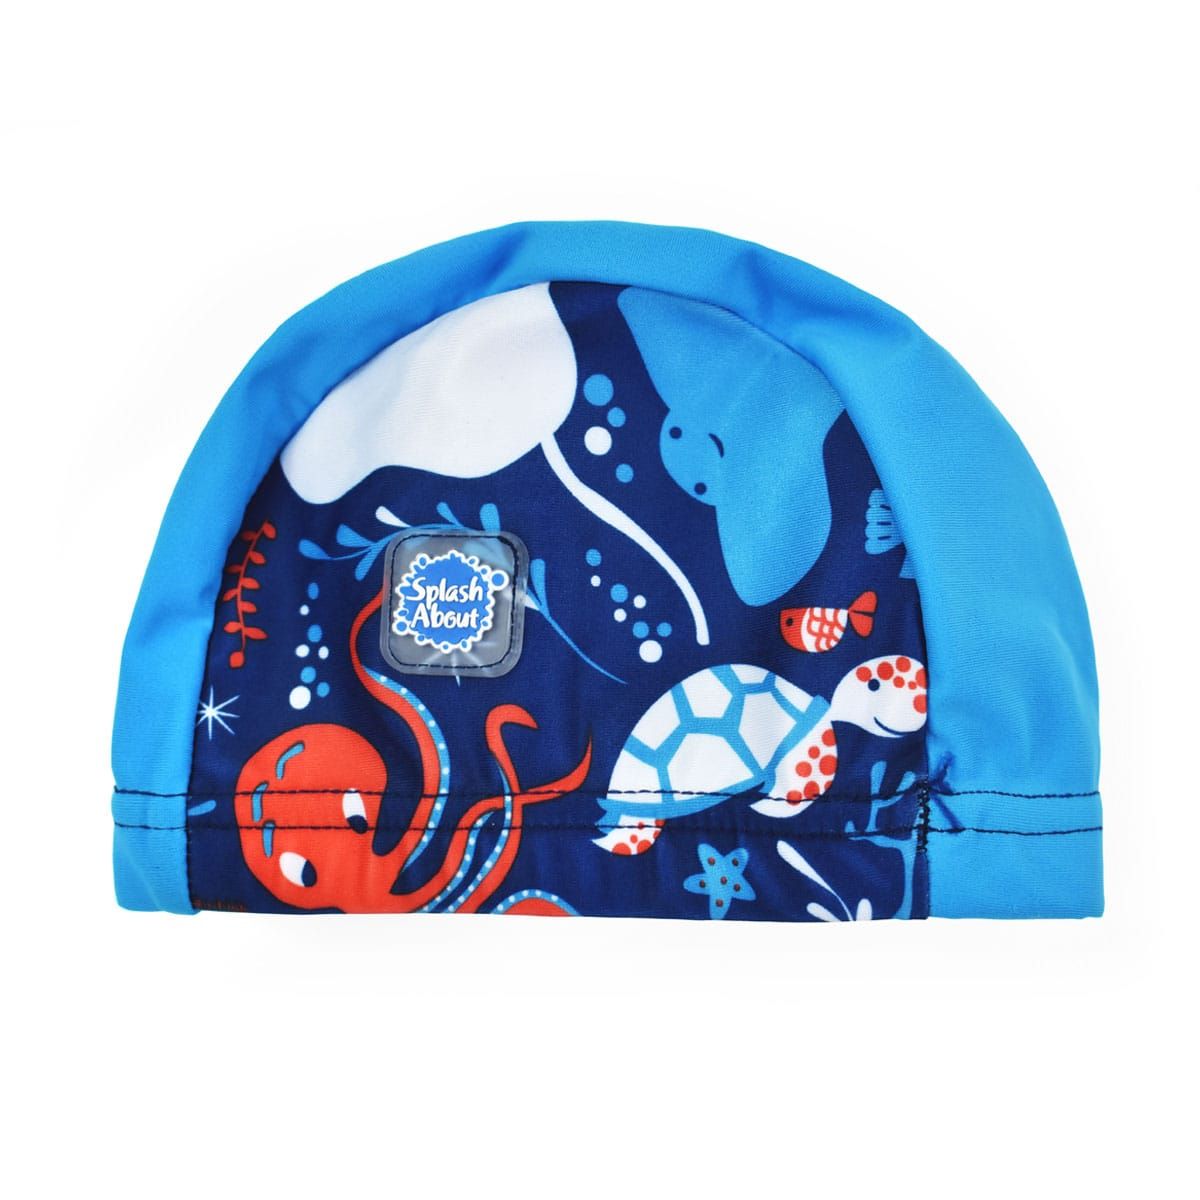 Cute baby swim hat in navy blue with blue trims and under the sea themed print, including octopus, stingray, fish and more.